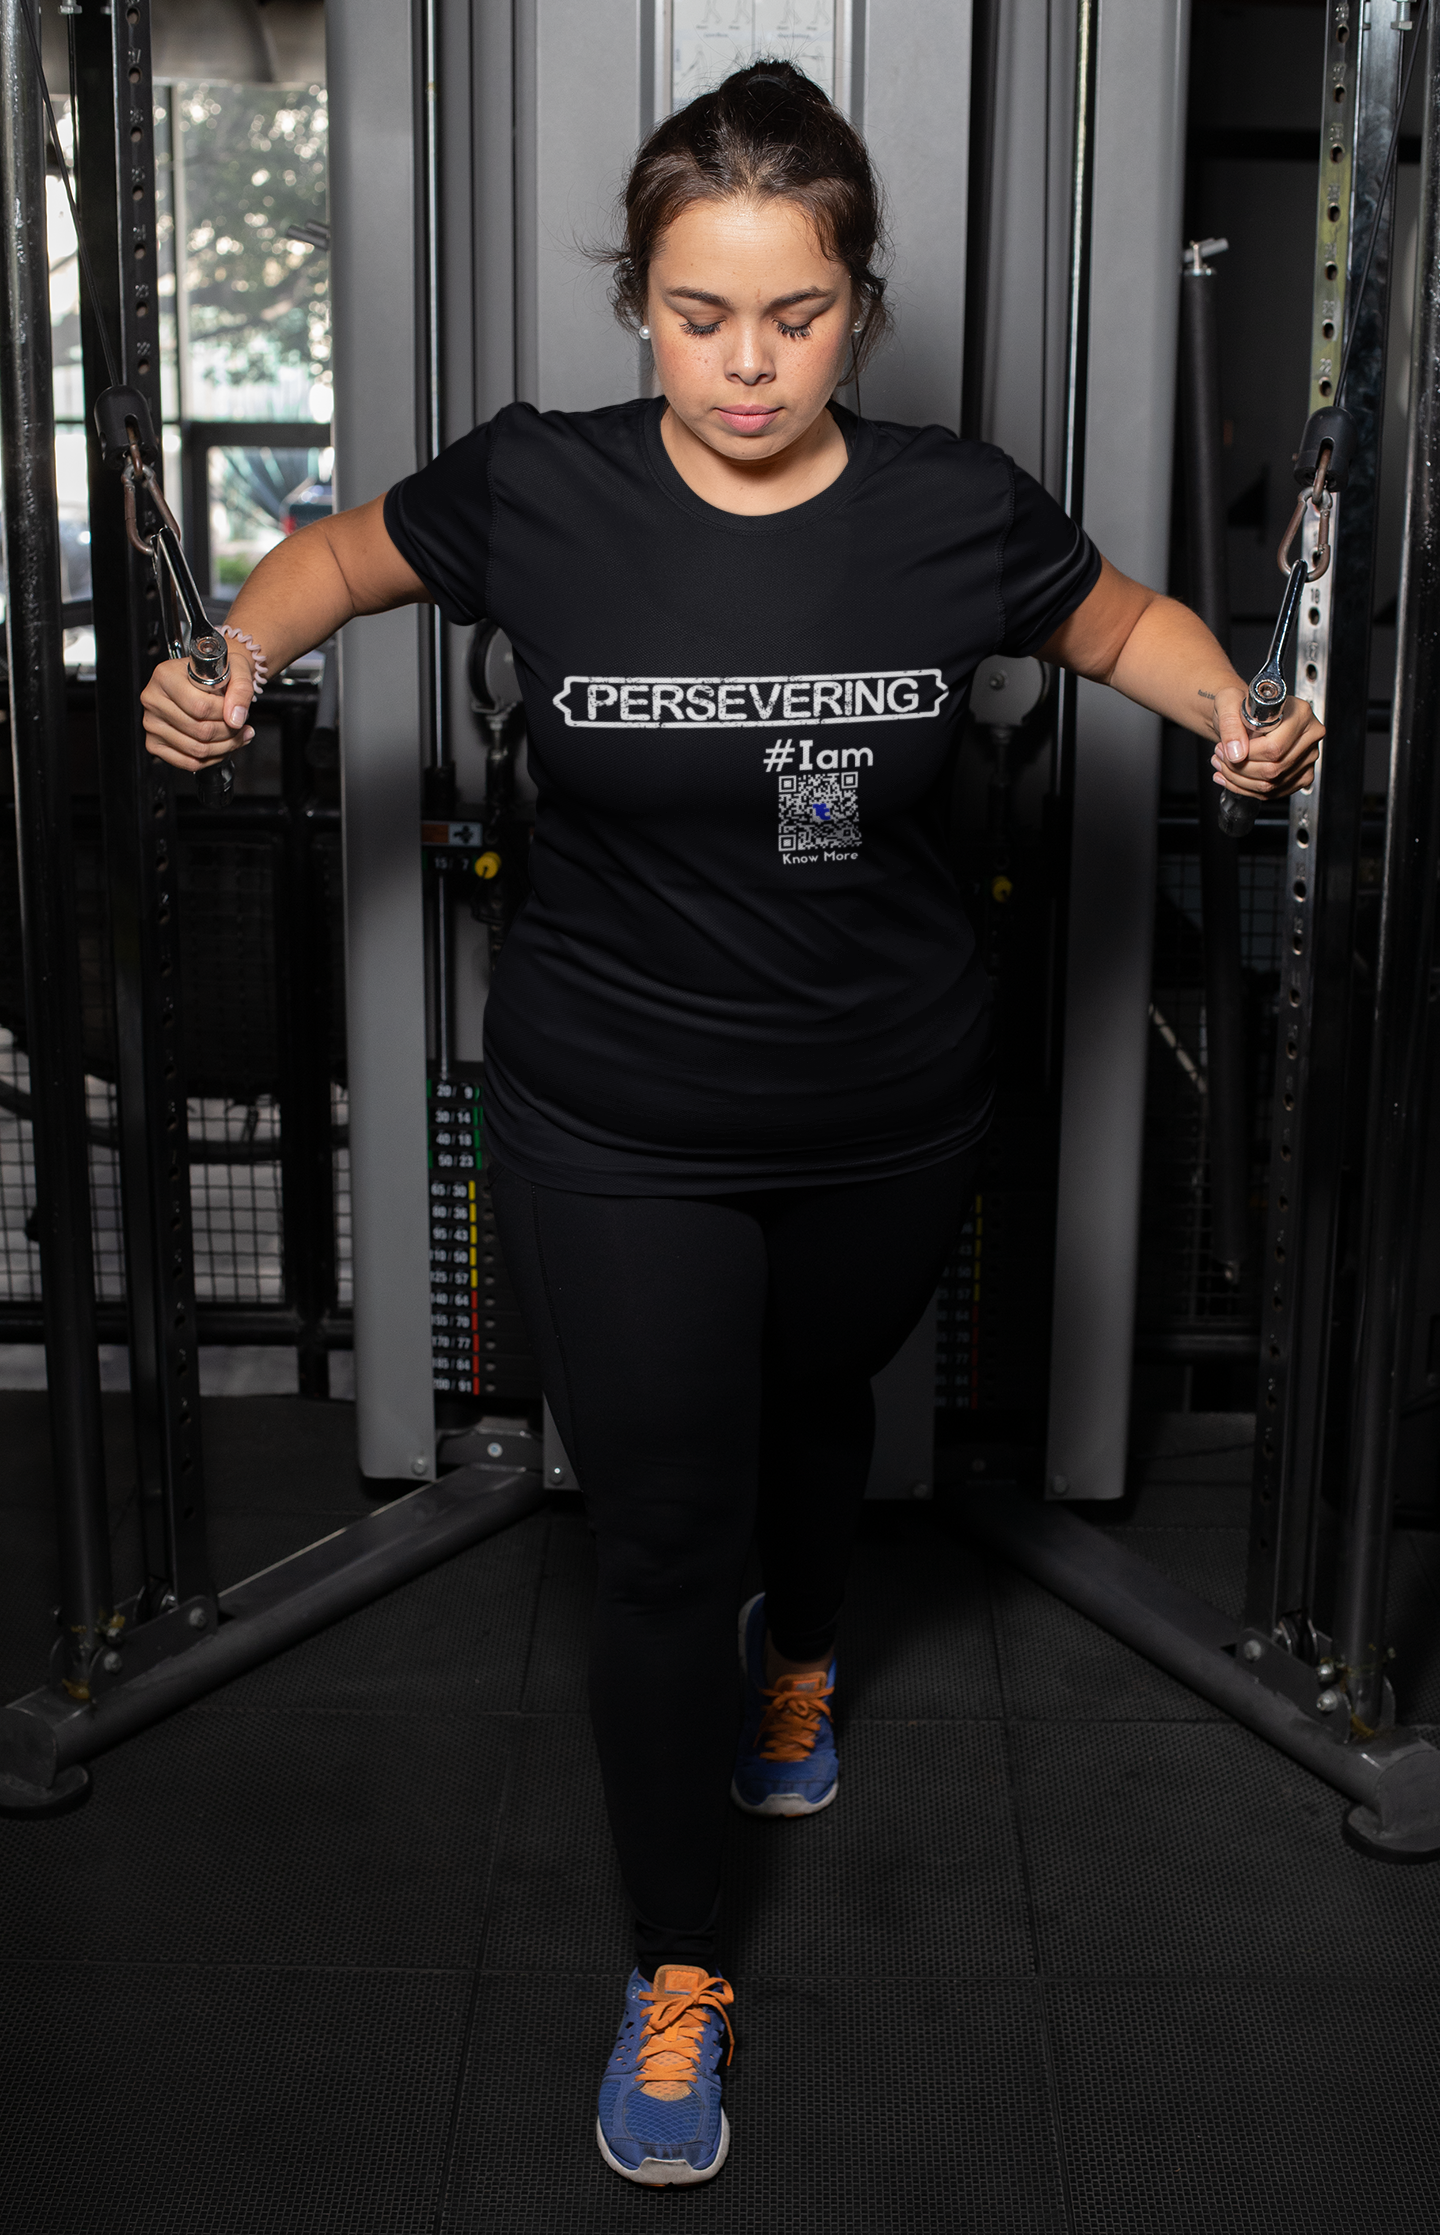 A female presenting person, using an arm weight training machine, is wearing a black CLAIM It Tee™. The CLAIM™ on the shirt reads {PERSEVERING} #Iam.